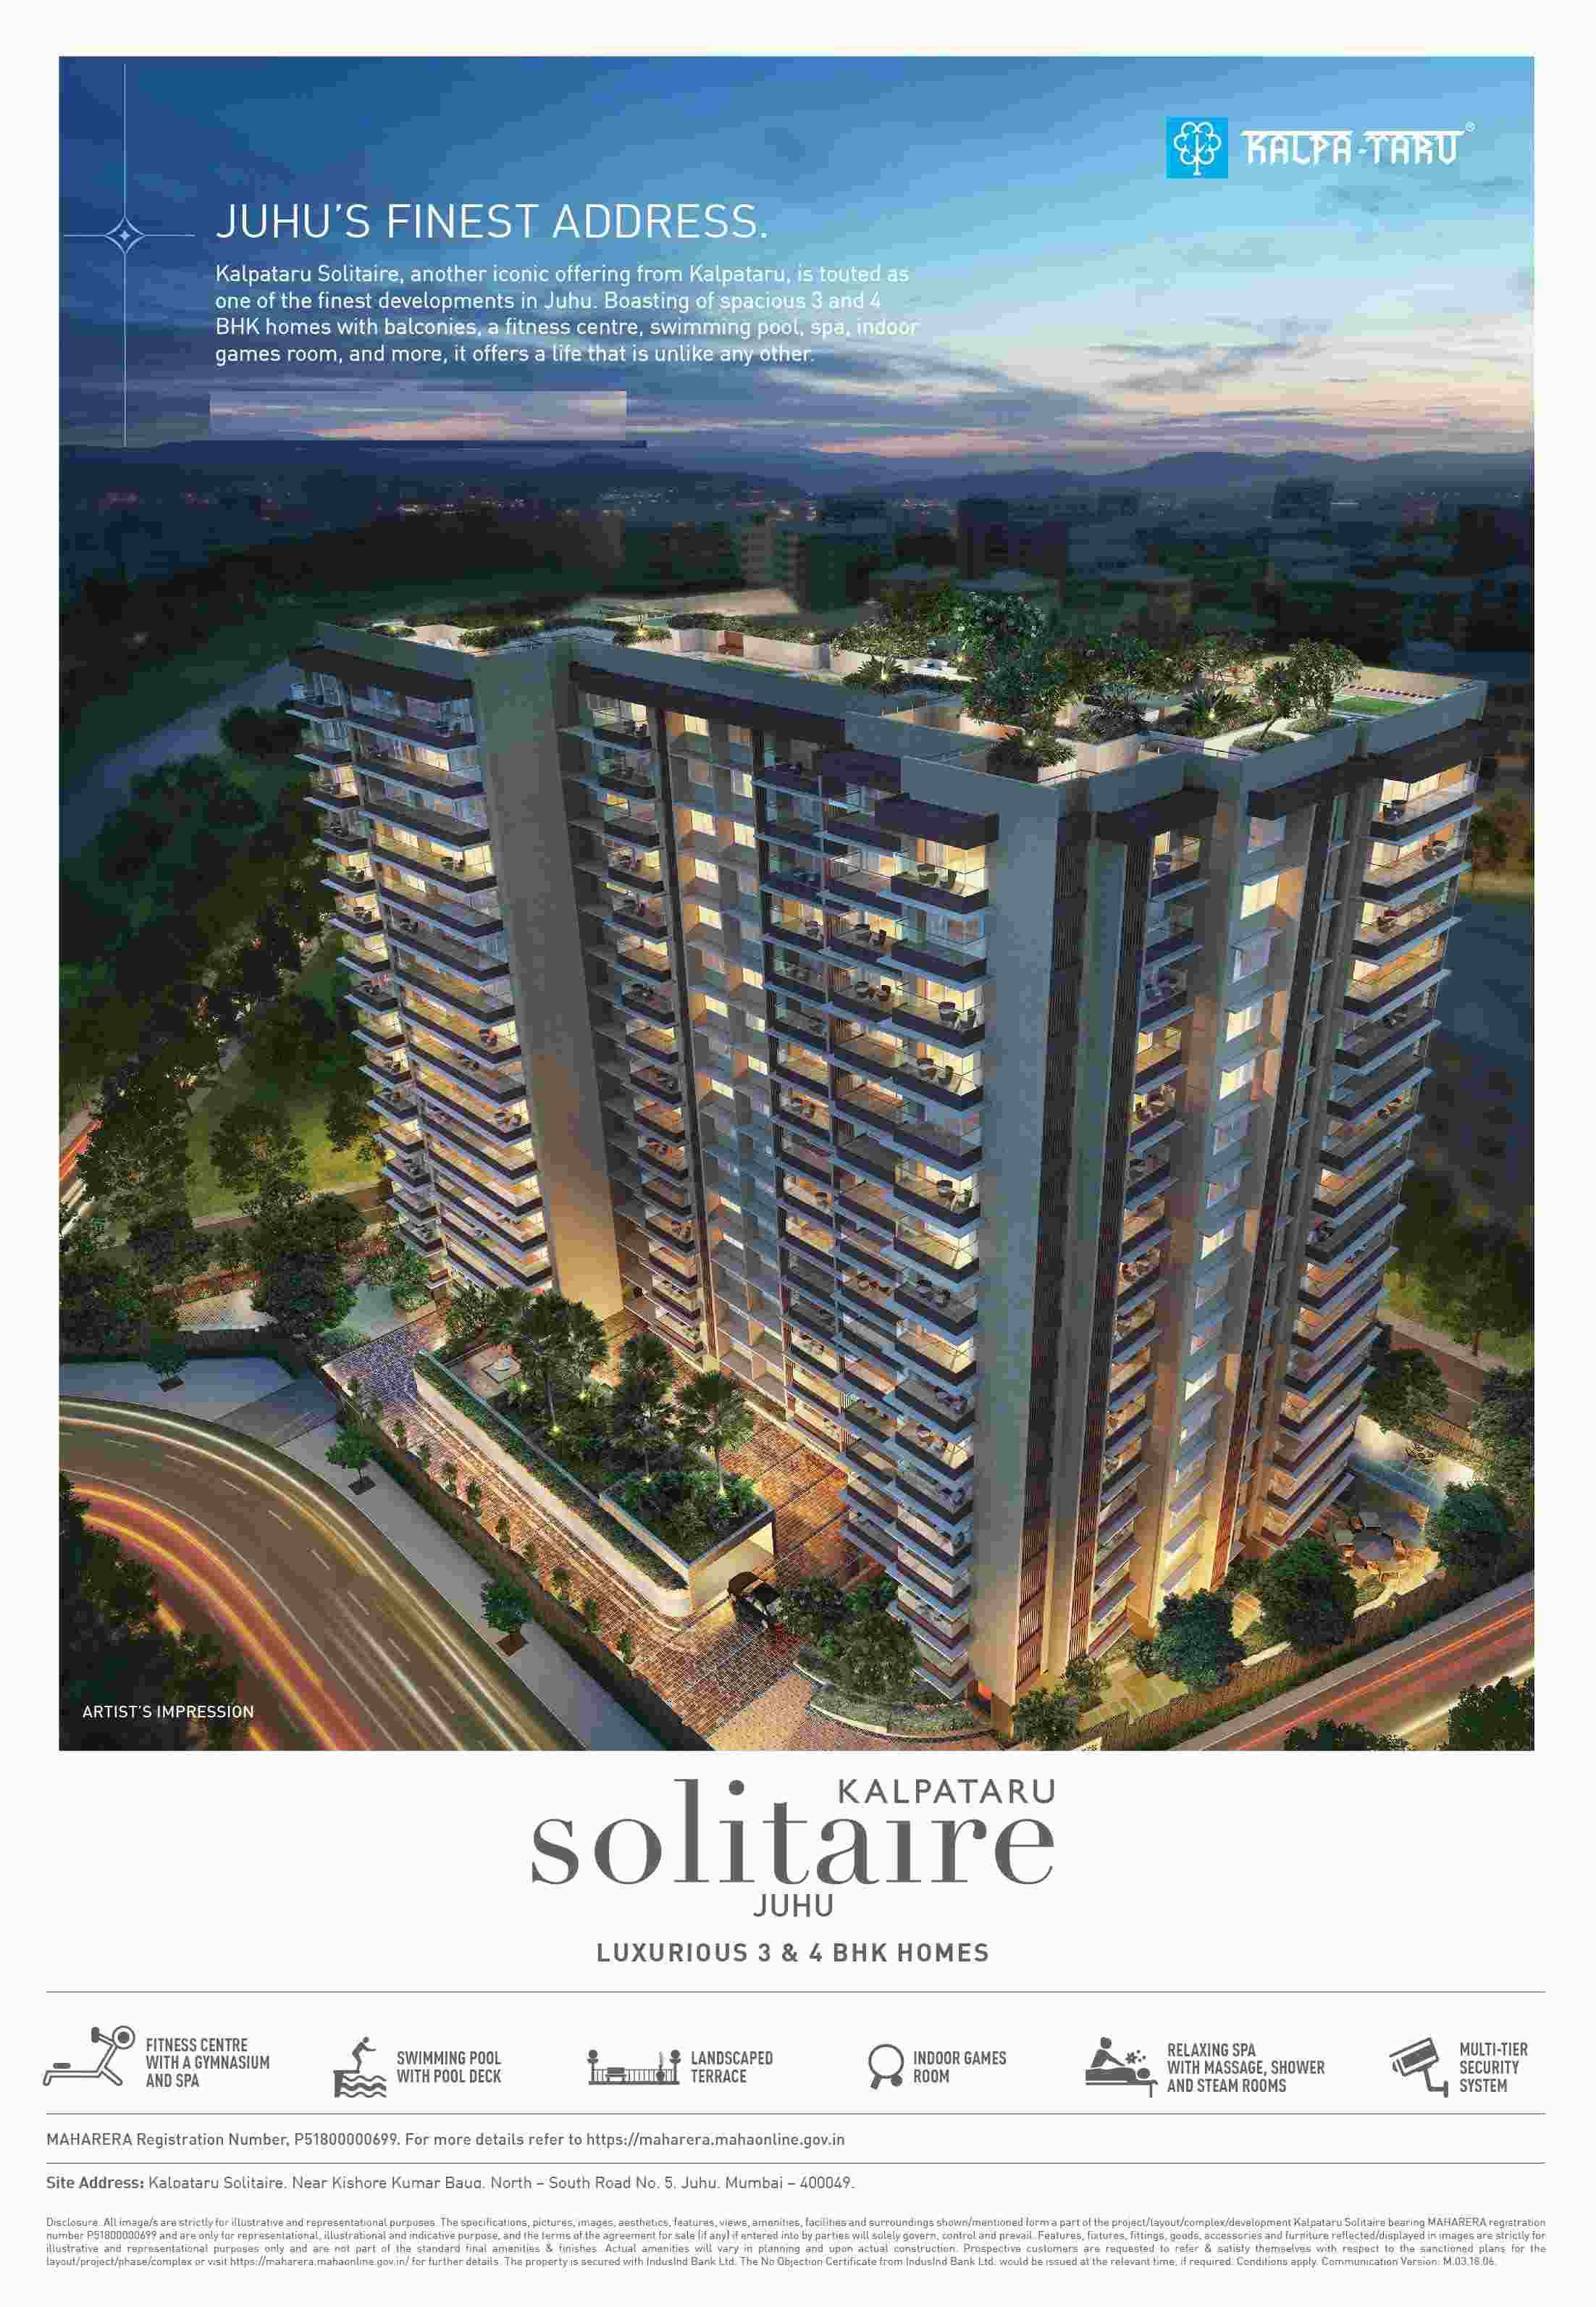 Book luxurious 3 & 4 BHK homes with world class amenities at Kalpataru Solitaire in Mumbai